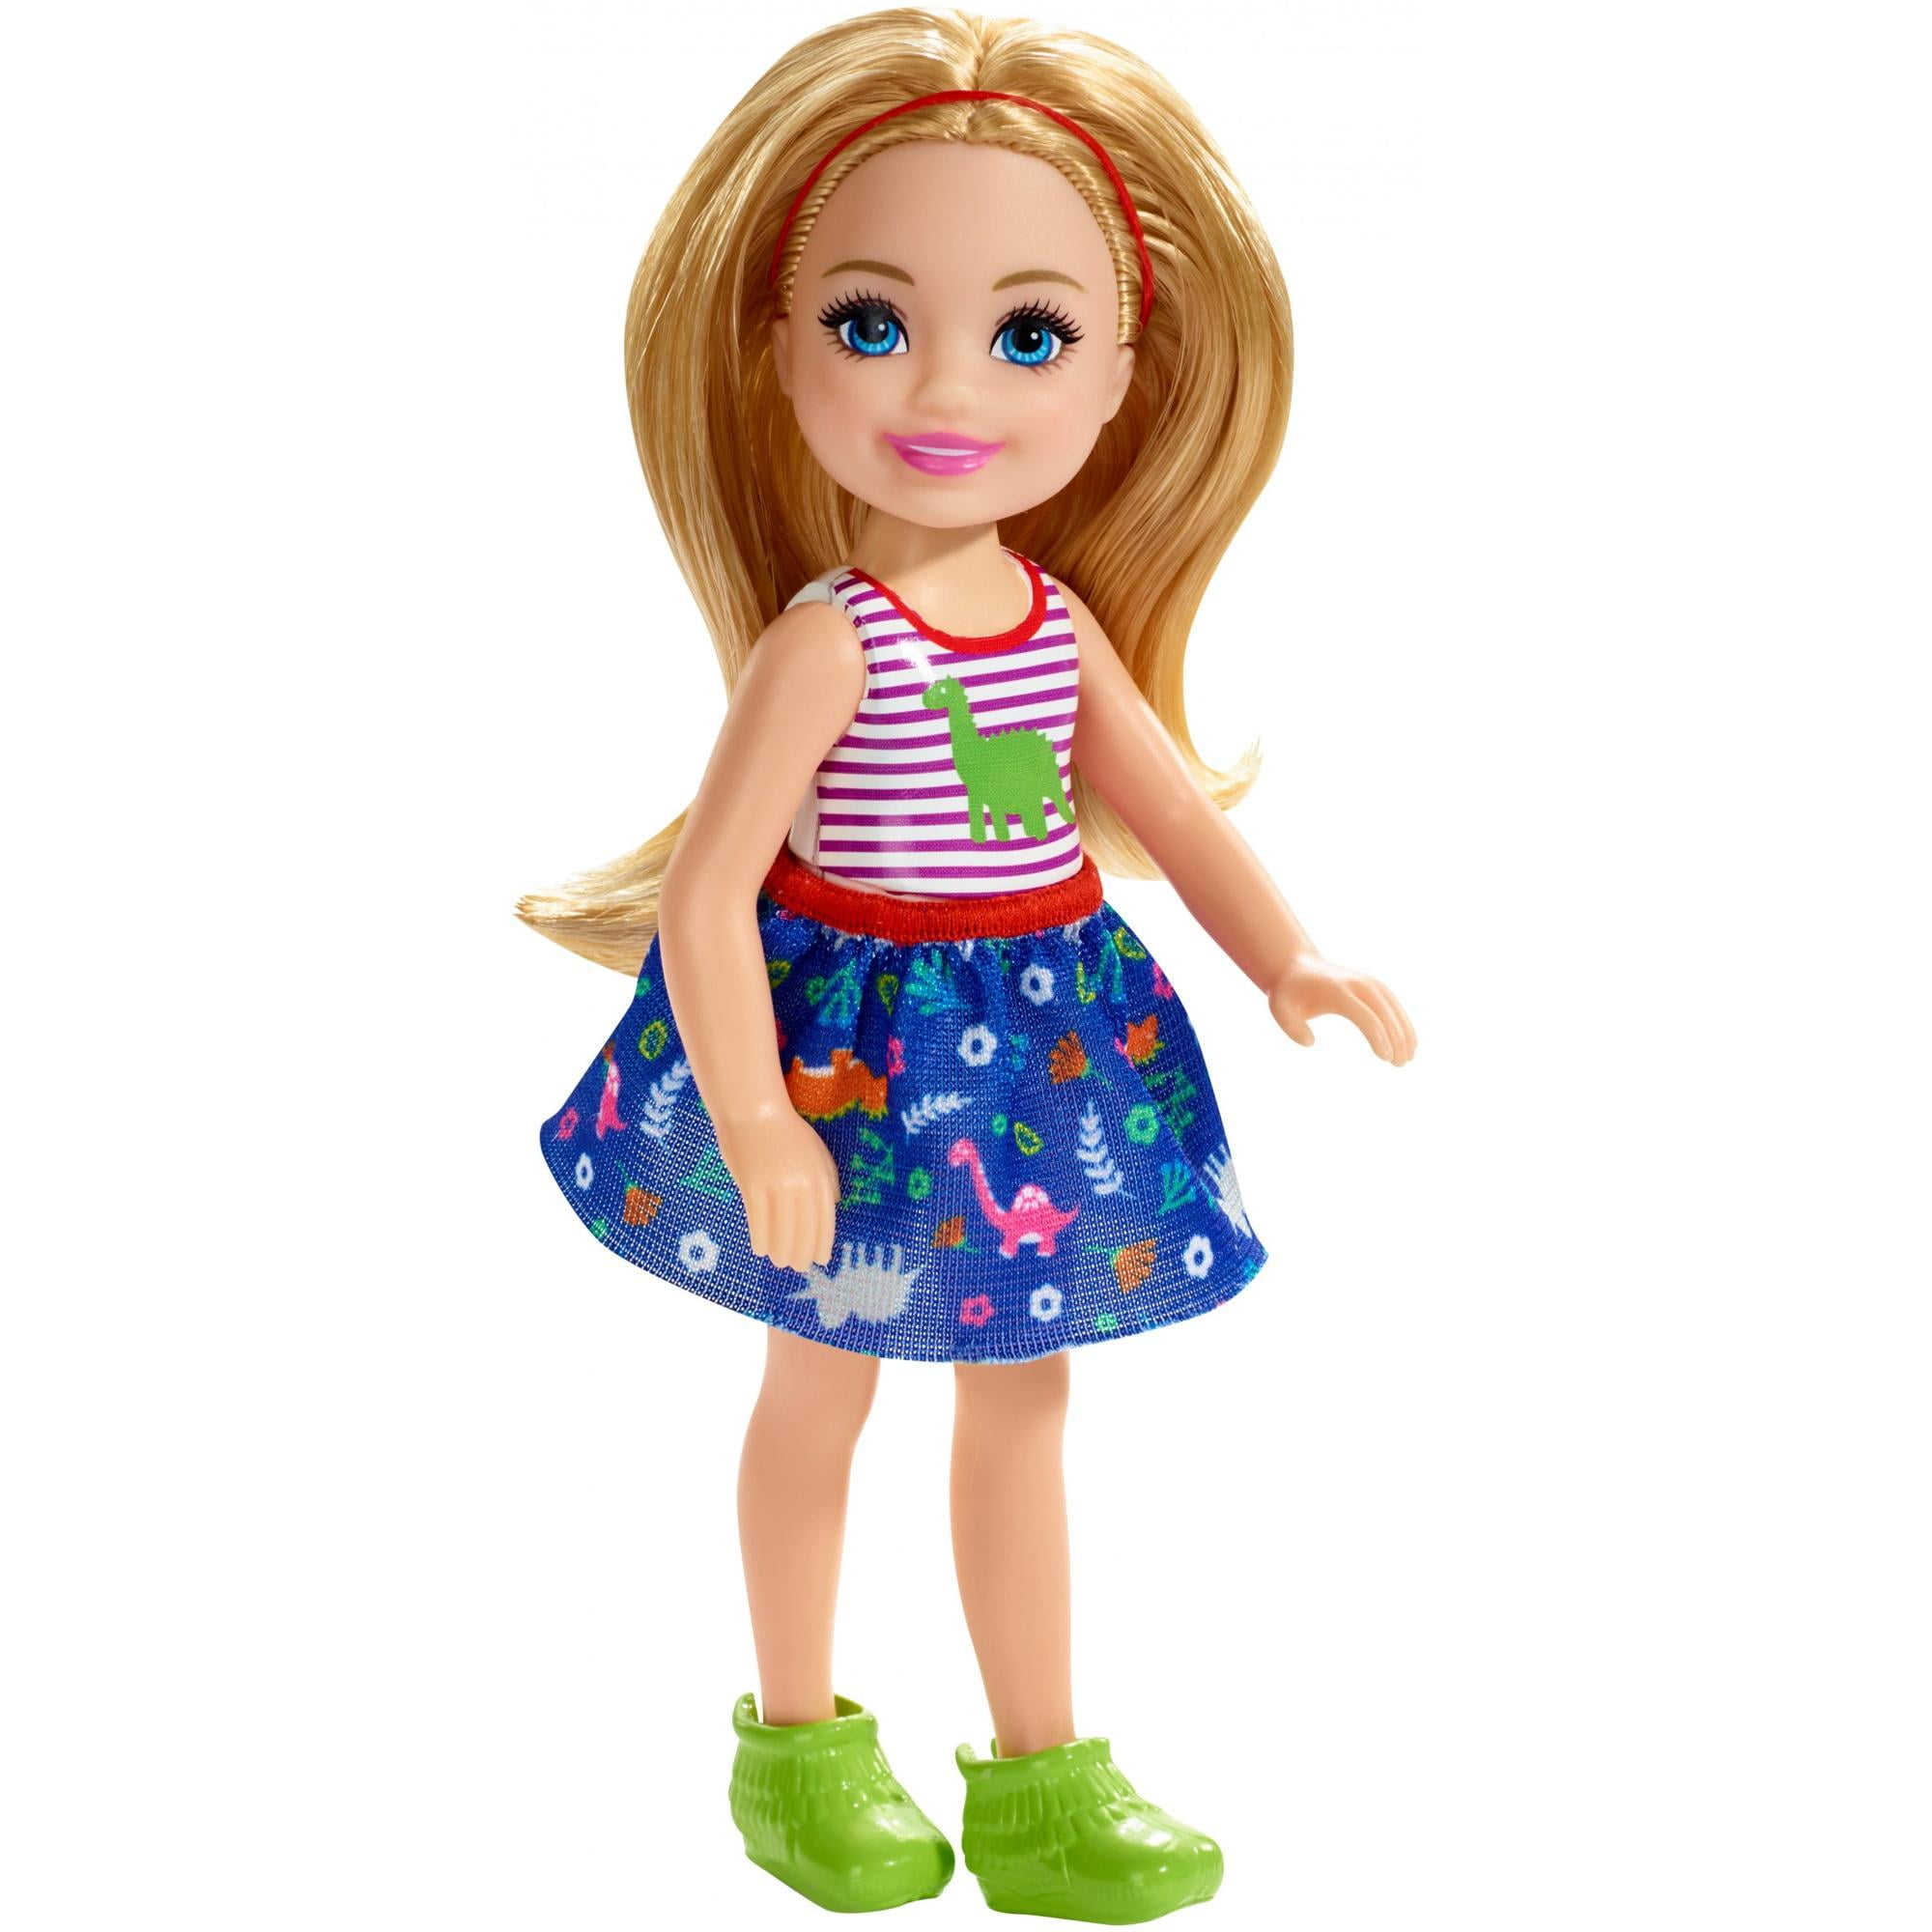 Barbie Club Chelsea Doll in Sloth Outfit GHV66 